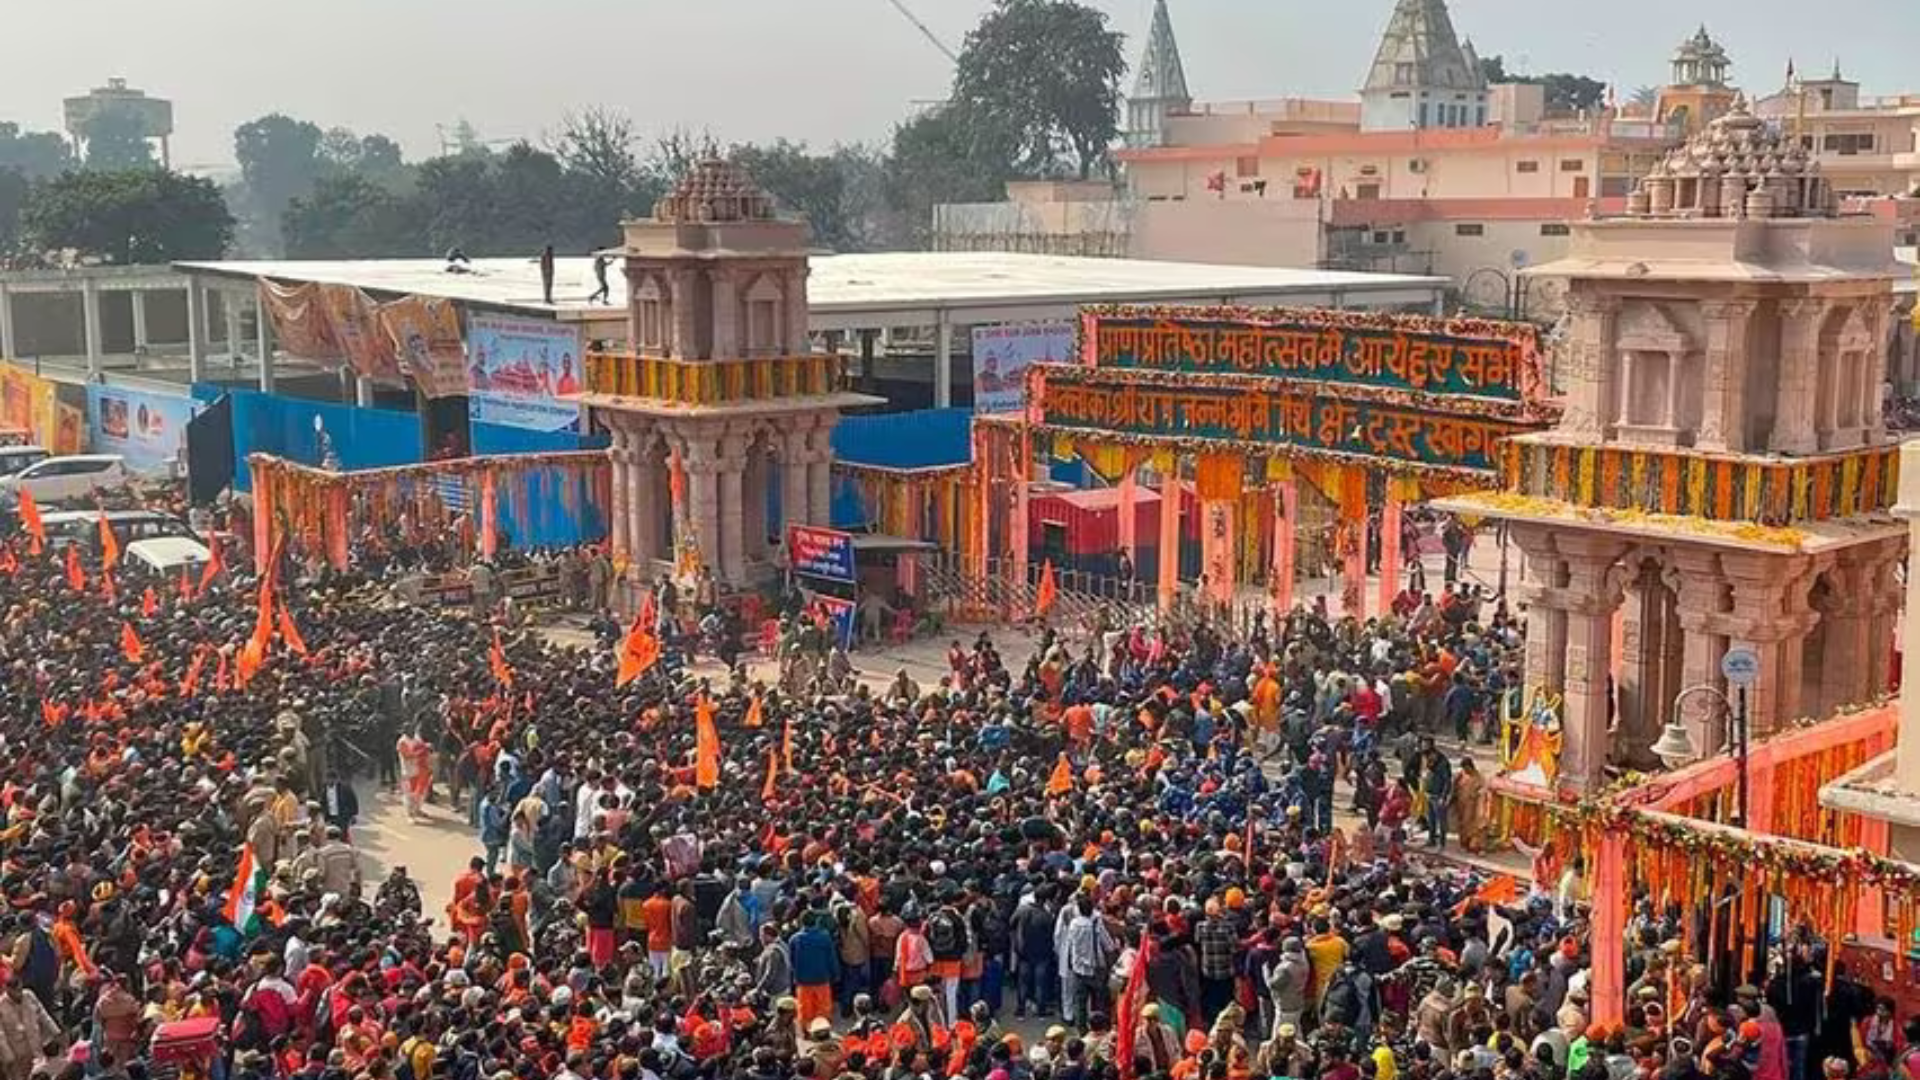 Large Crowds Converge Outside Ayodhya’s Ram Temple for Worship